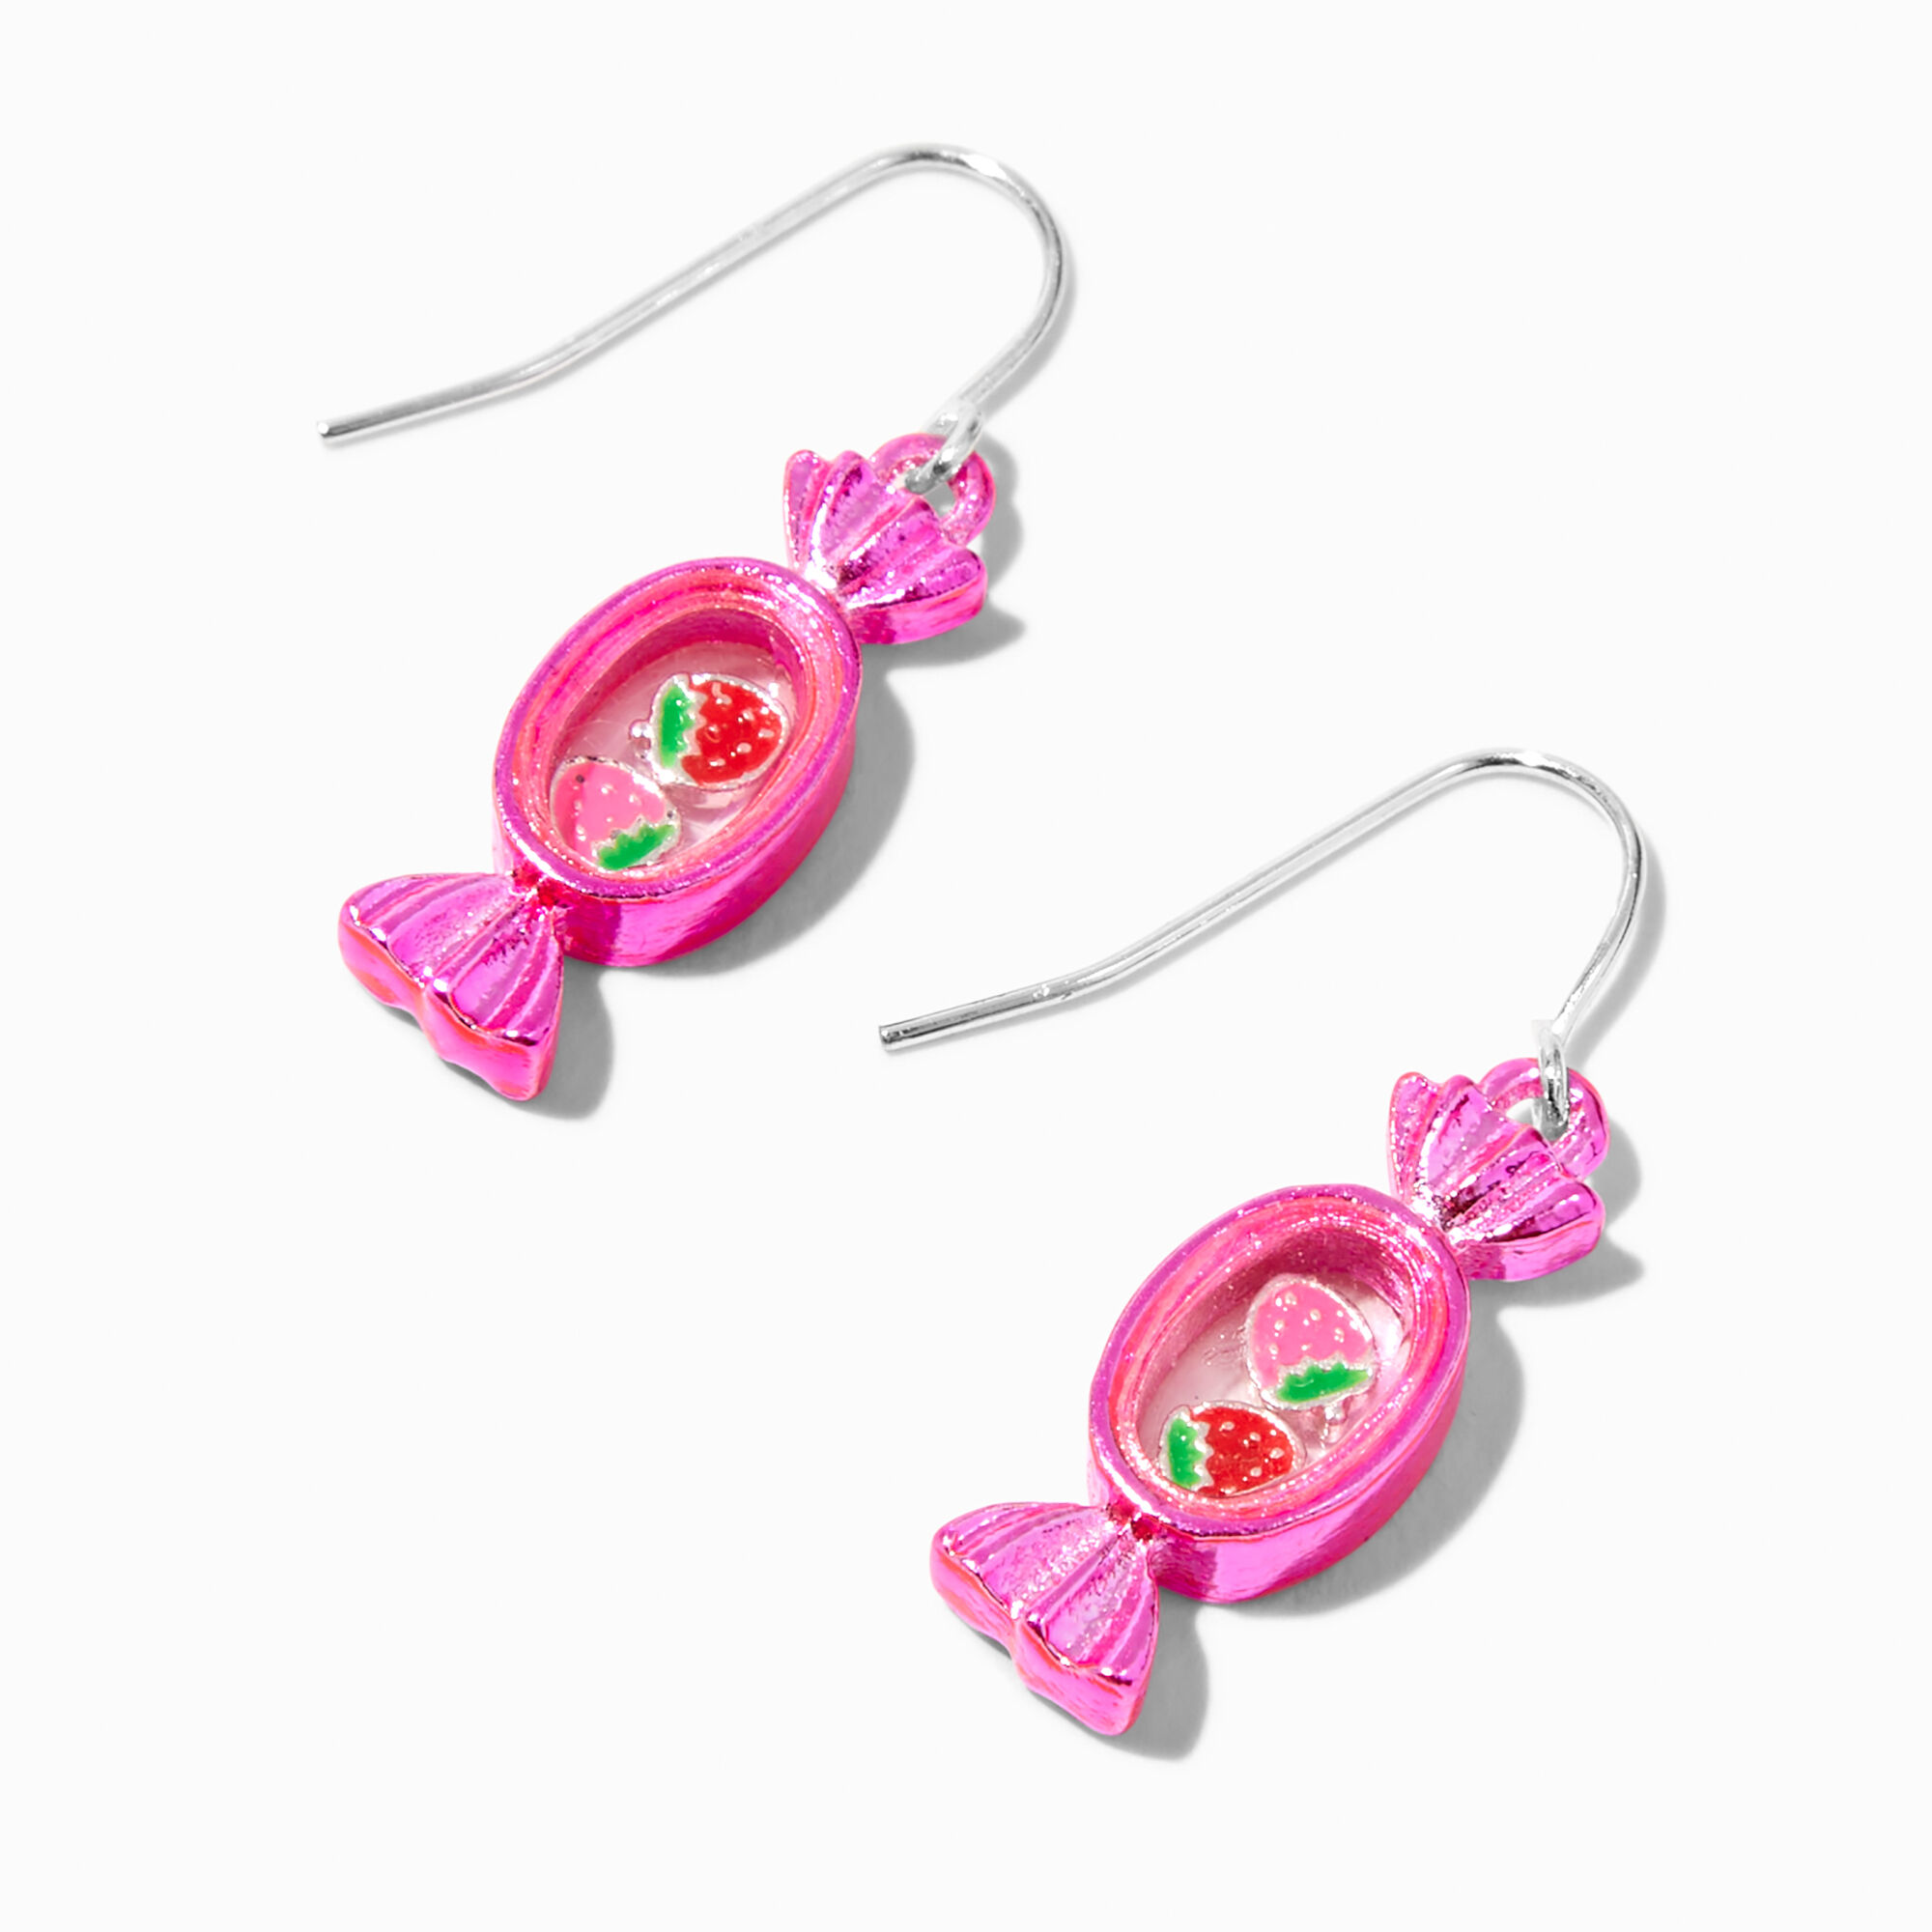 View Claires Strawberry Candy Shaker 1 Drop Earrings Pink information